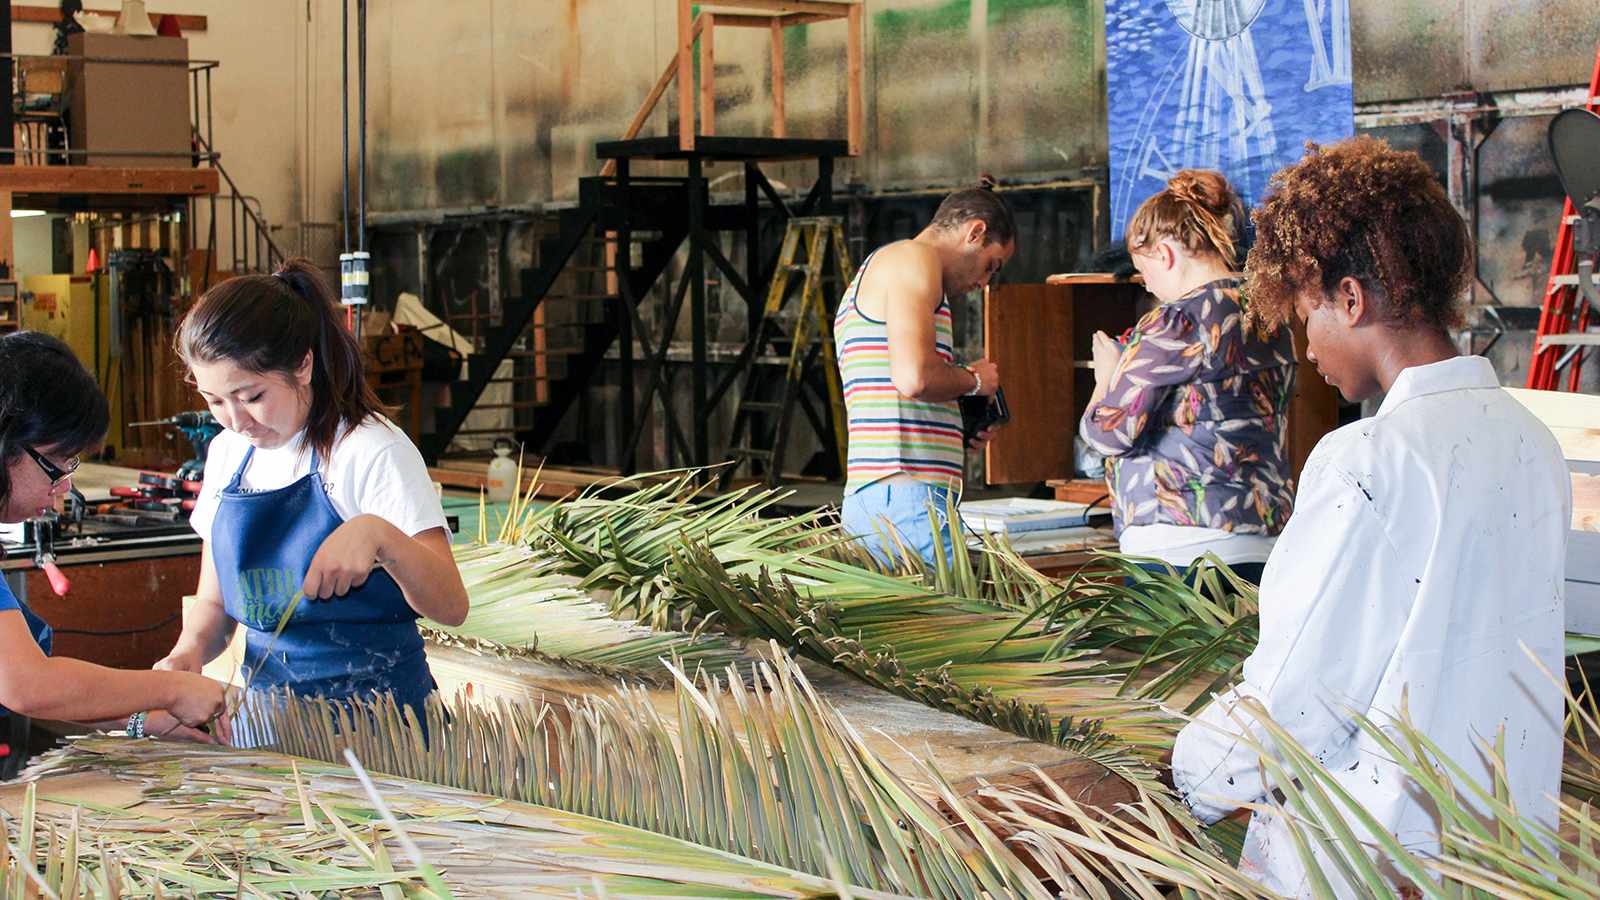 Students building a set for a theatrical production